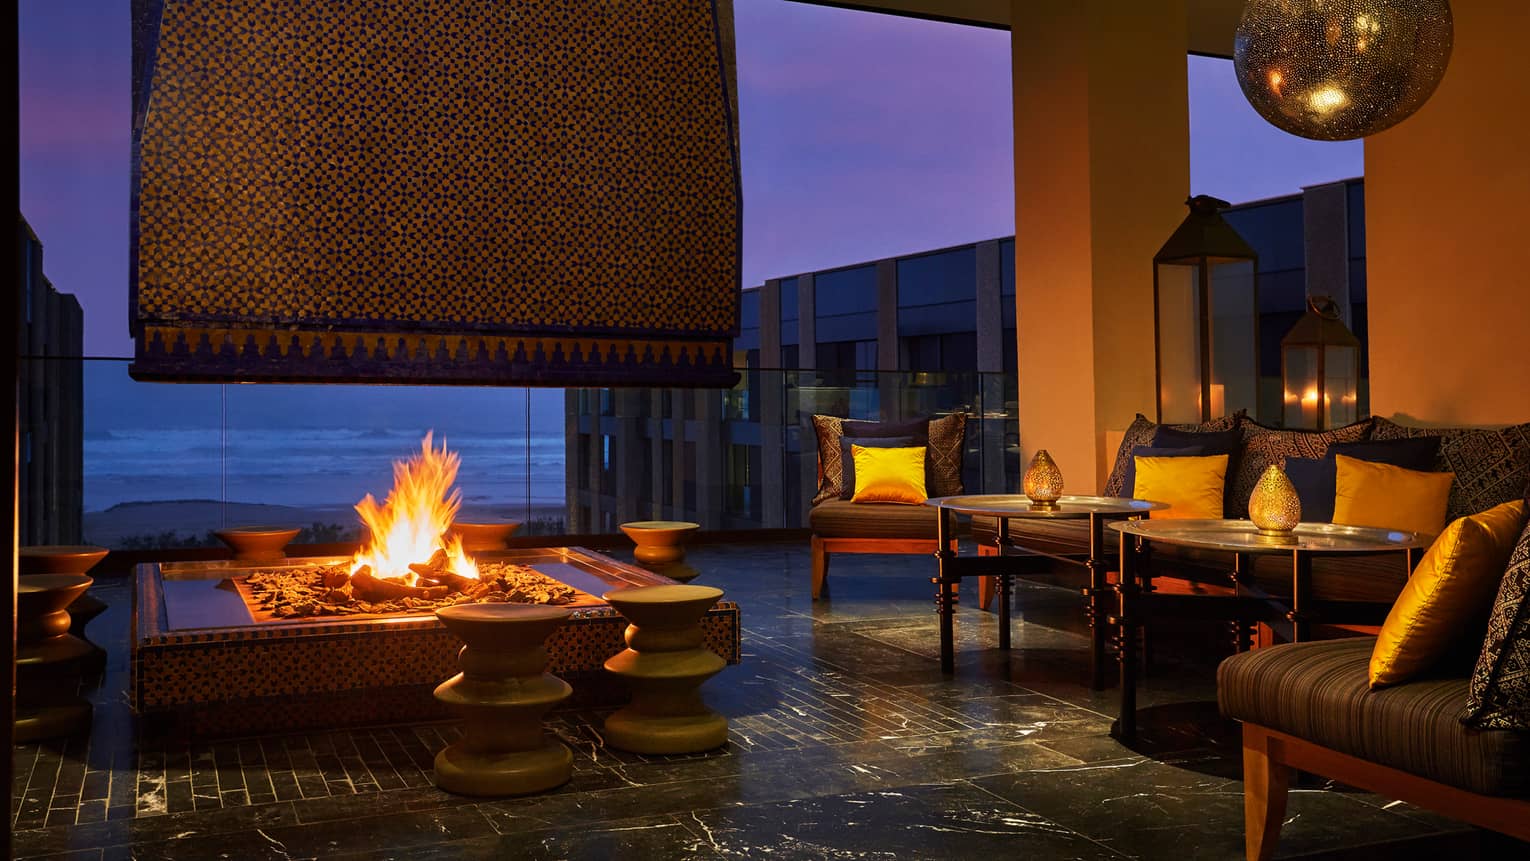 Patios sofas, beaches around large outdoor fireplace on Mint terrace at night